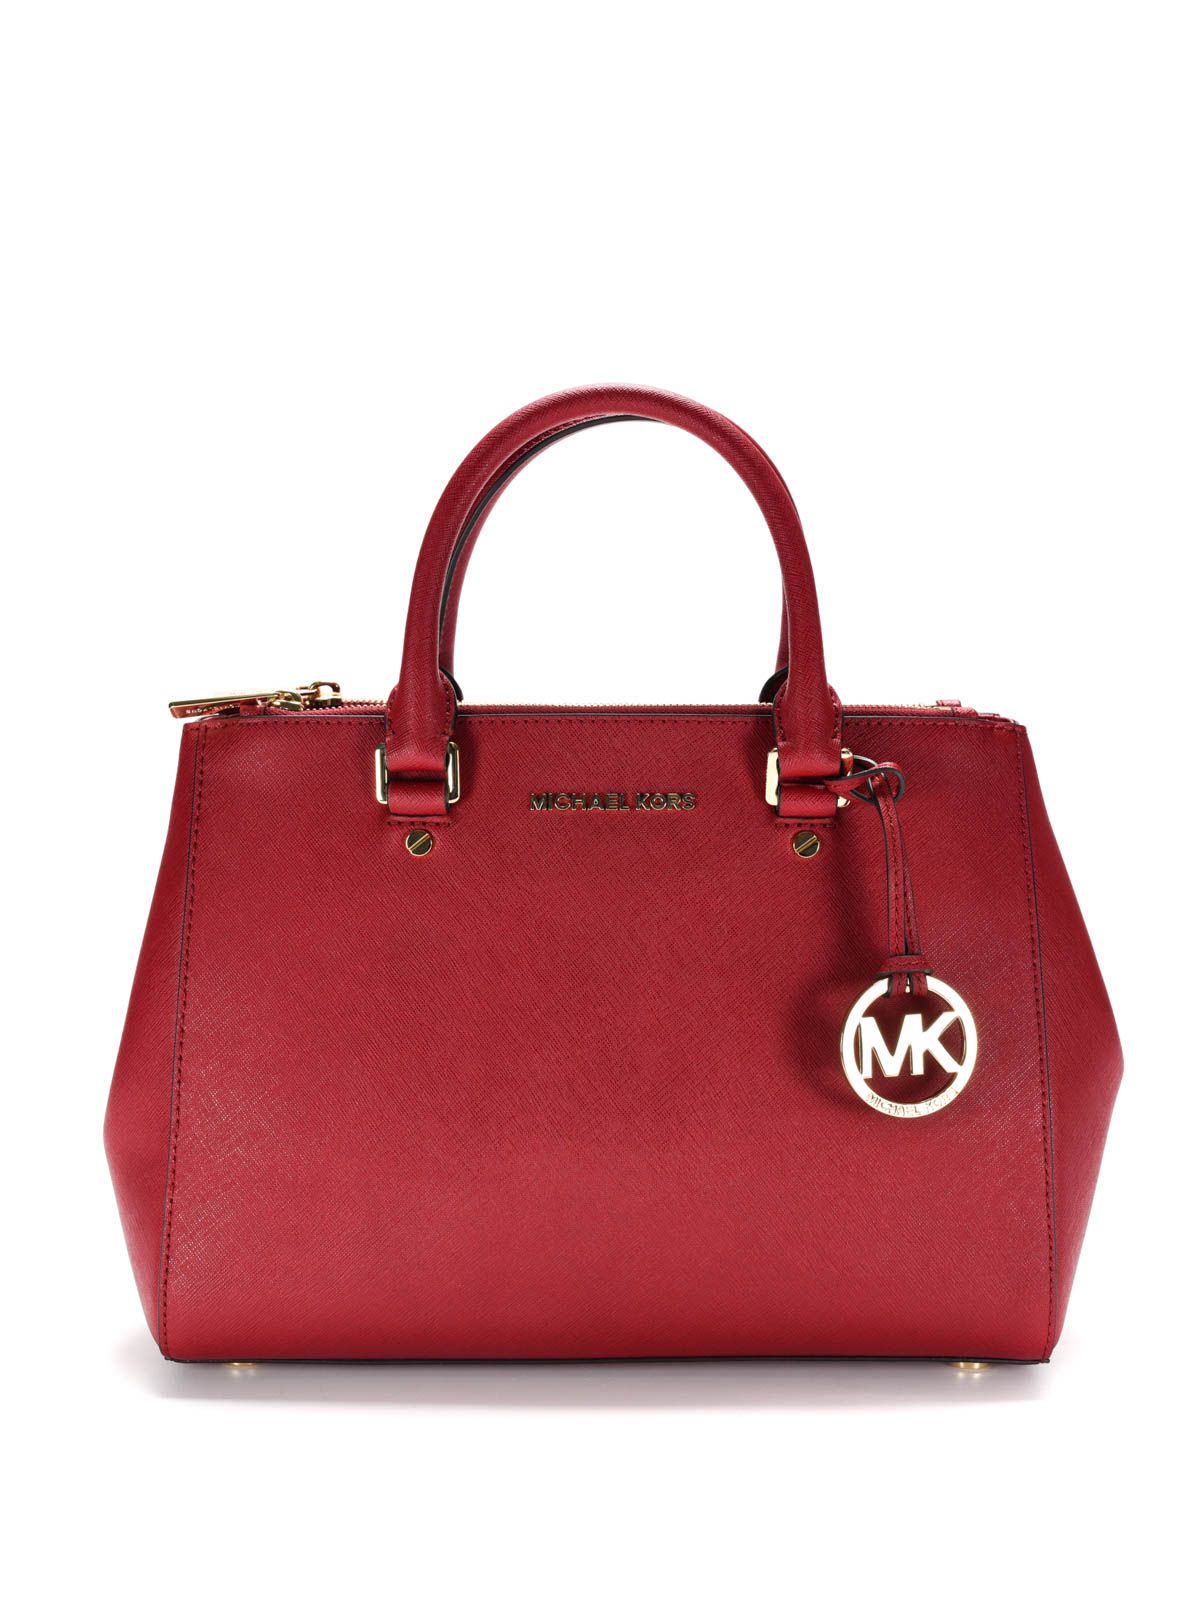 Michael Kors Saffiano Tote Damson | Confederated Tribes of the Umatilla Indian Reservation